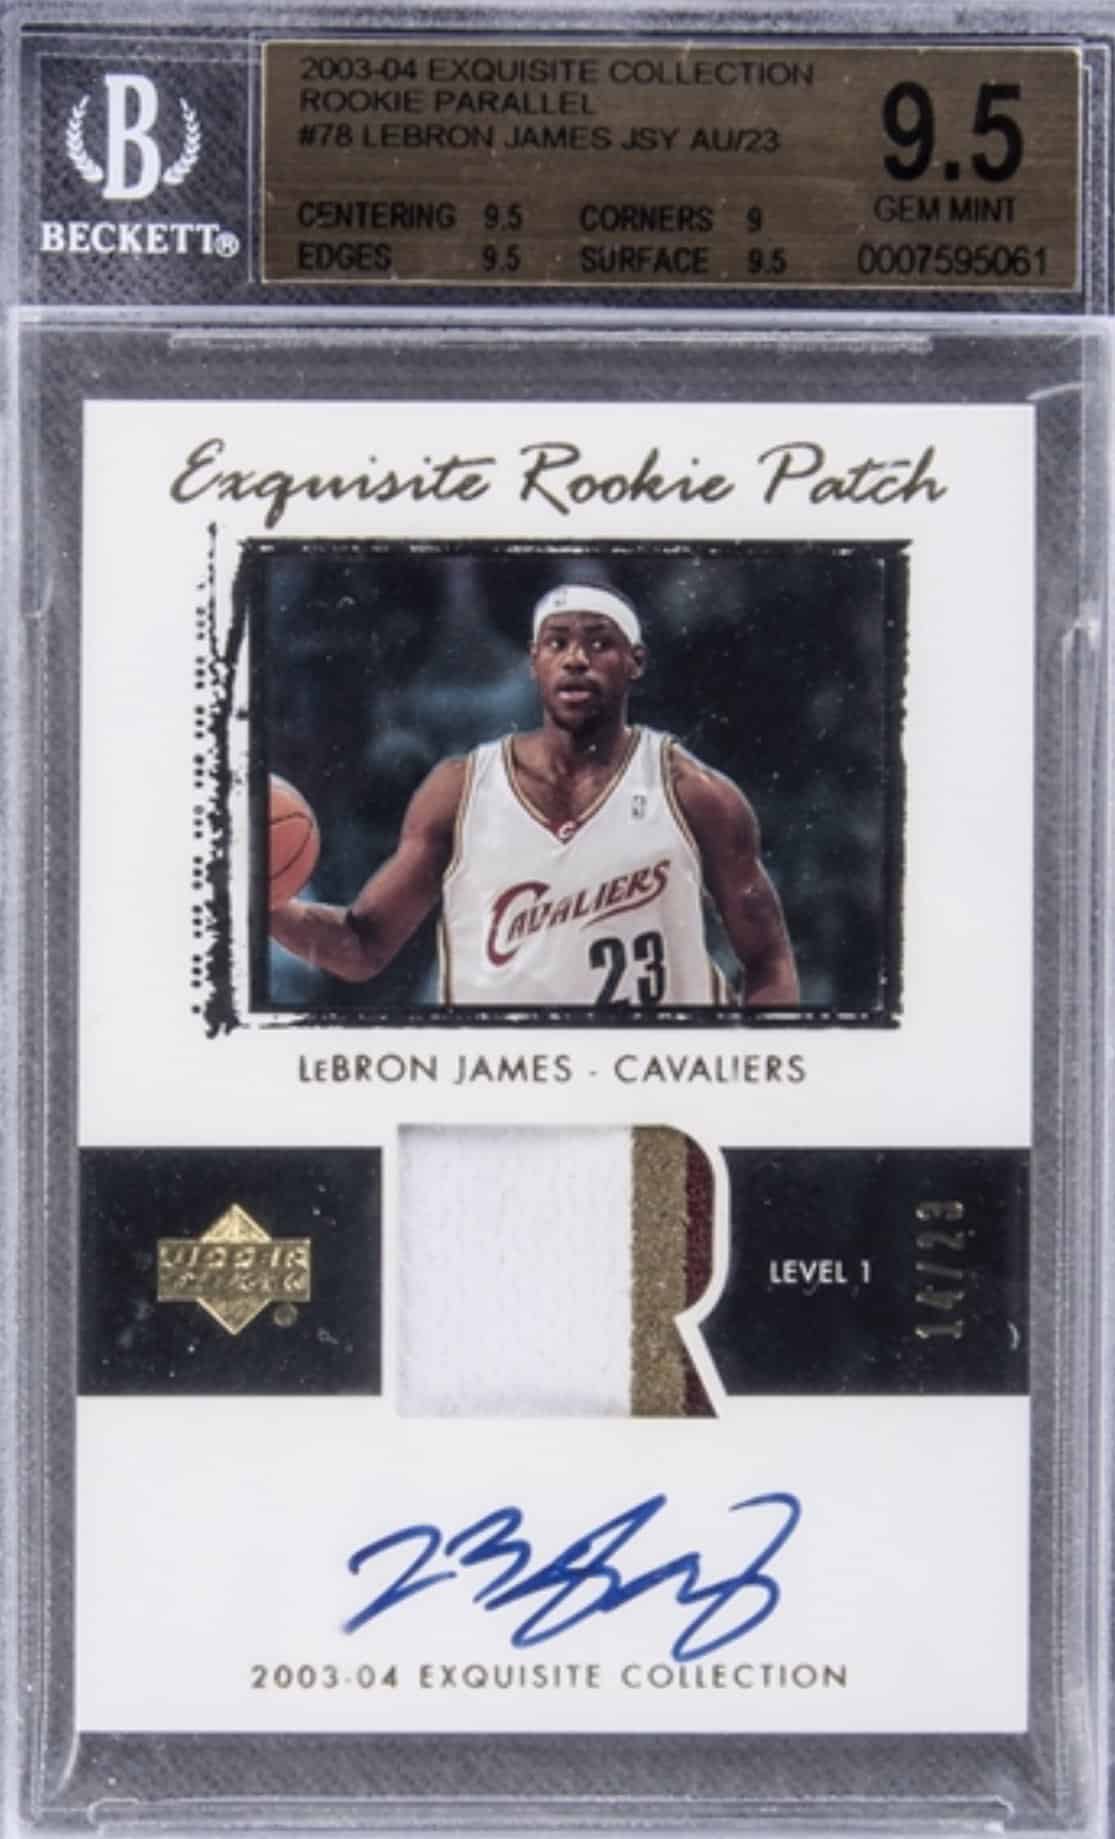  2003-04 Exquisite Collection Rookie Patch Parallel #78 LeBron James /23